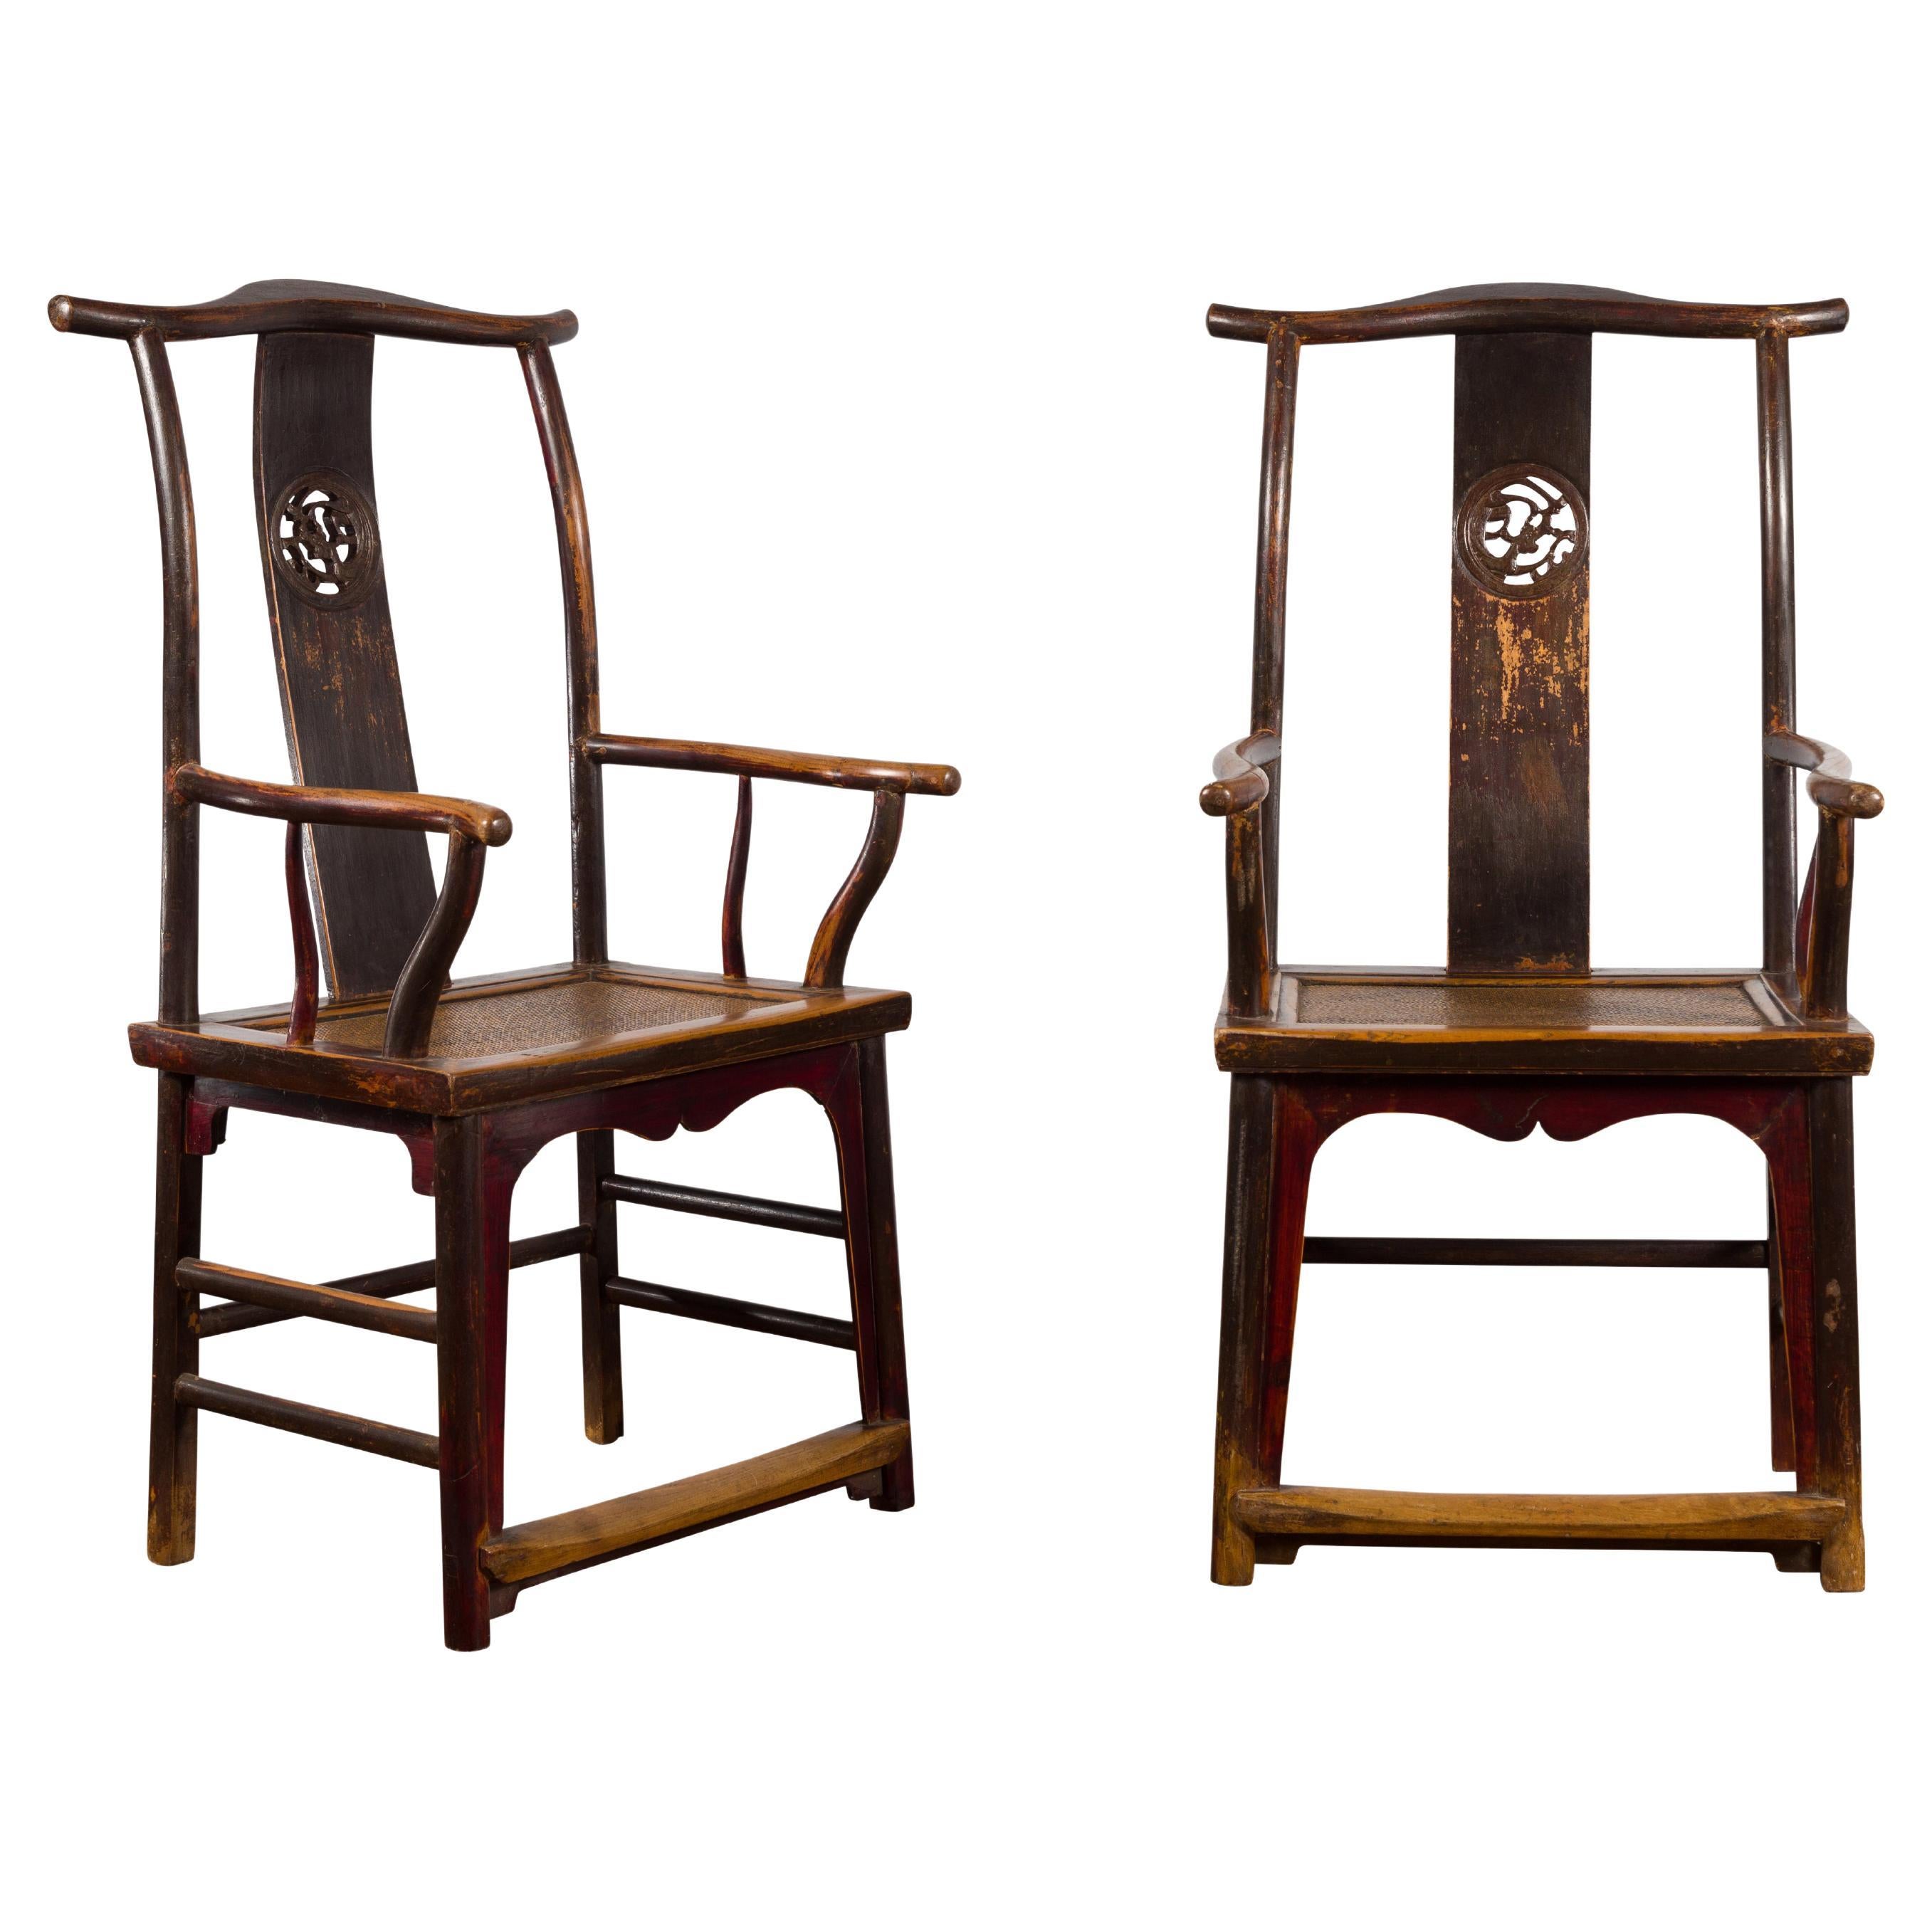 Pair of Chinese Qing Dynasty 19th Century Yoke Back Armchairs with Rattan Seats For Sale